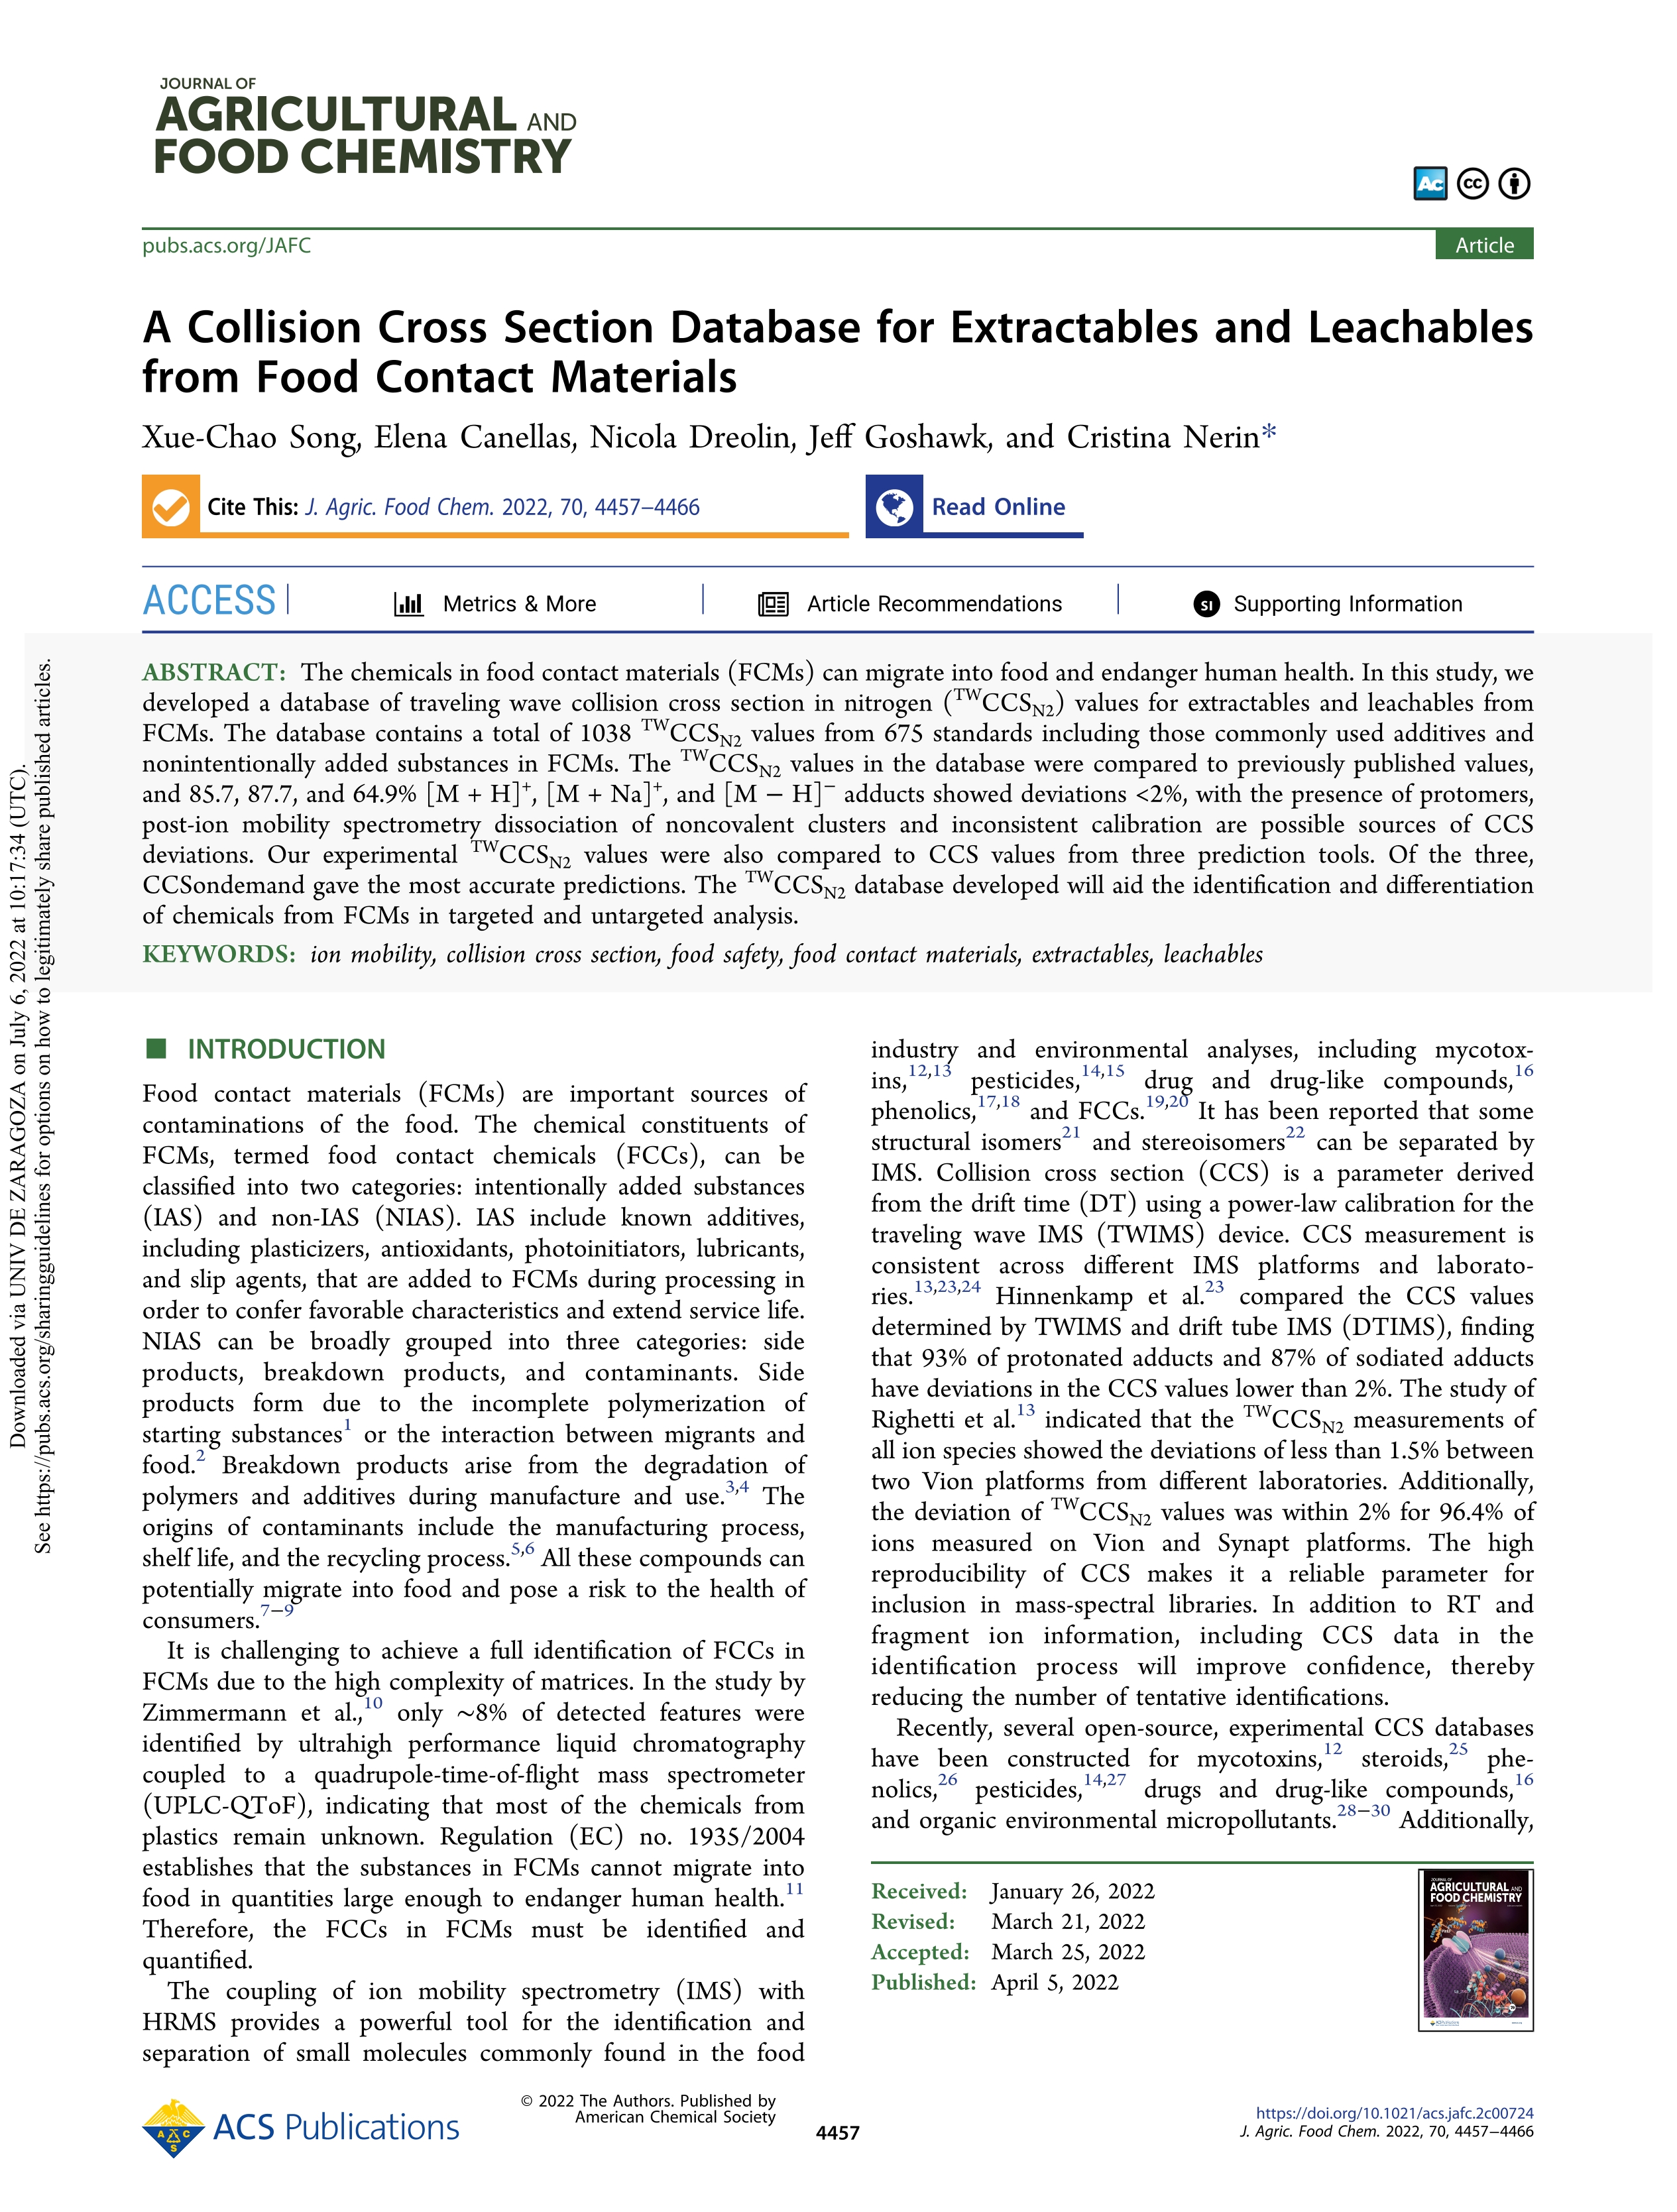 A collision cross section database for extractables and leachables from food contact materials